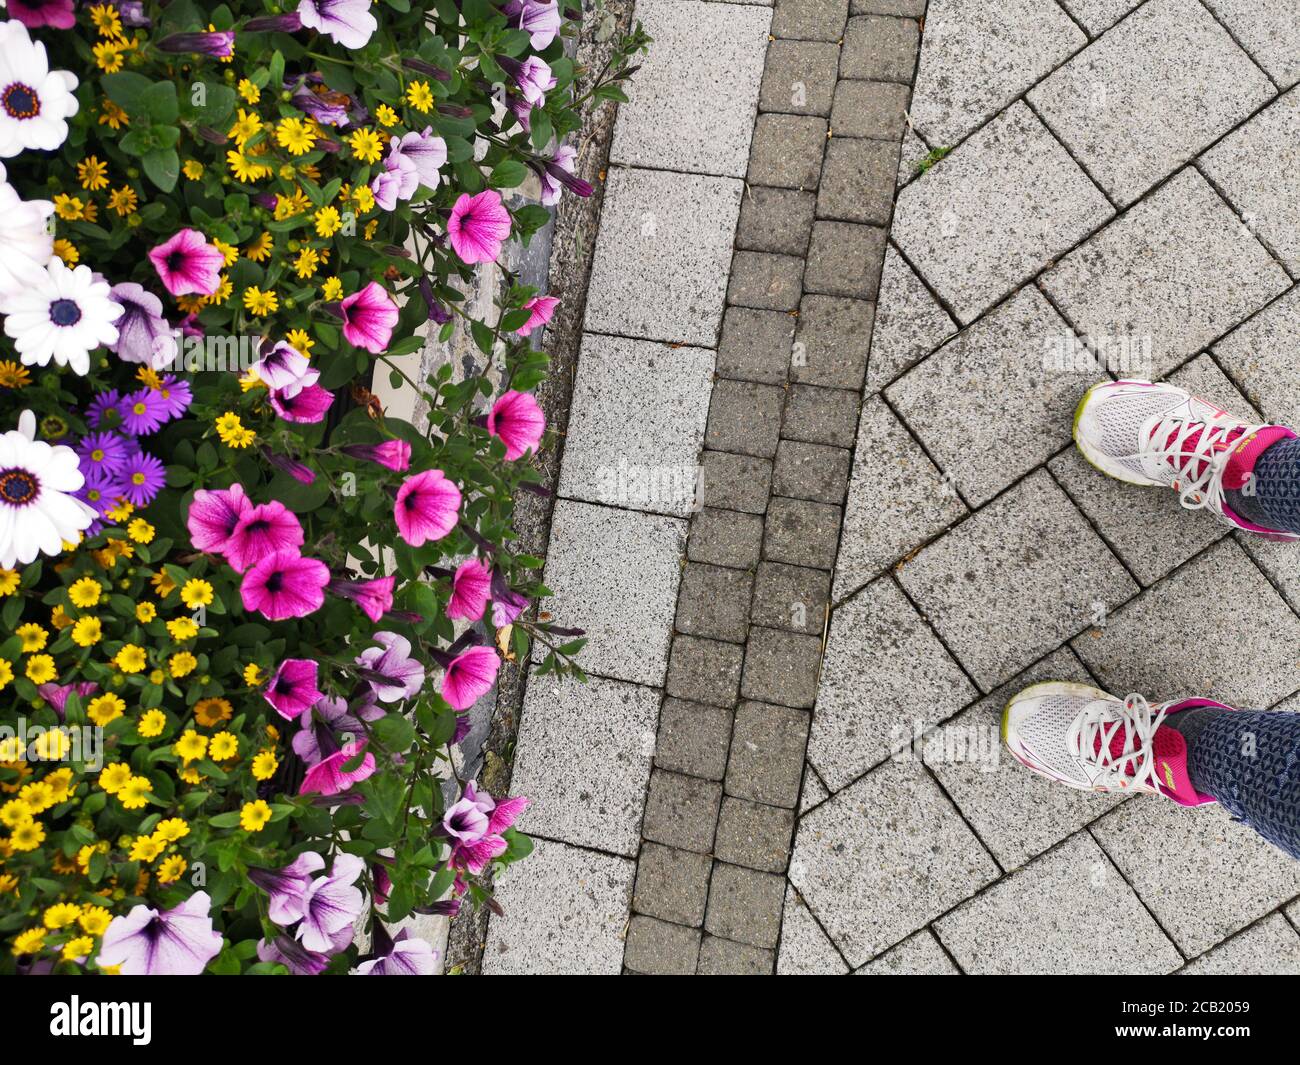 person standing next to a beautiful flower garden pot full of petunias and other lovely flowers Stock Photo